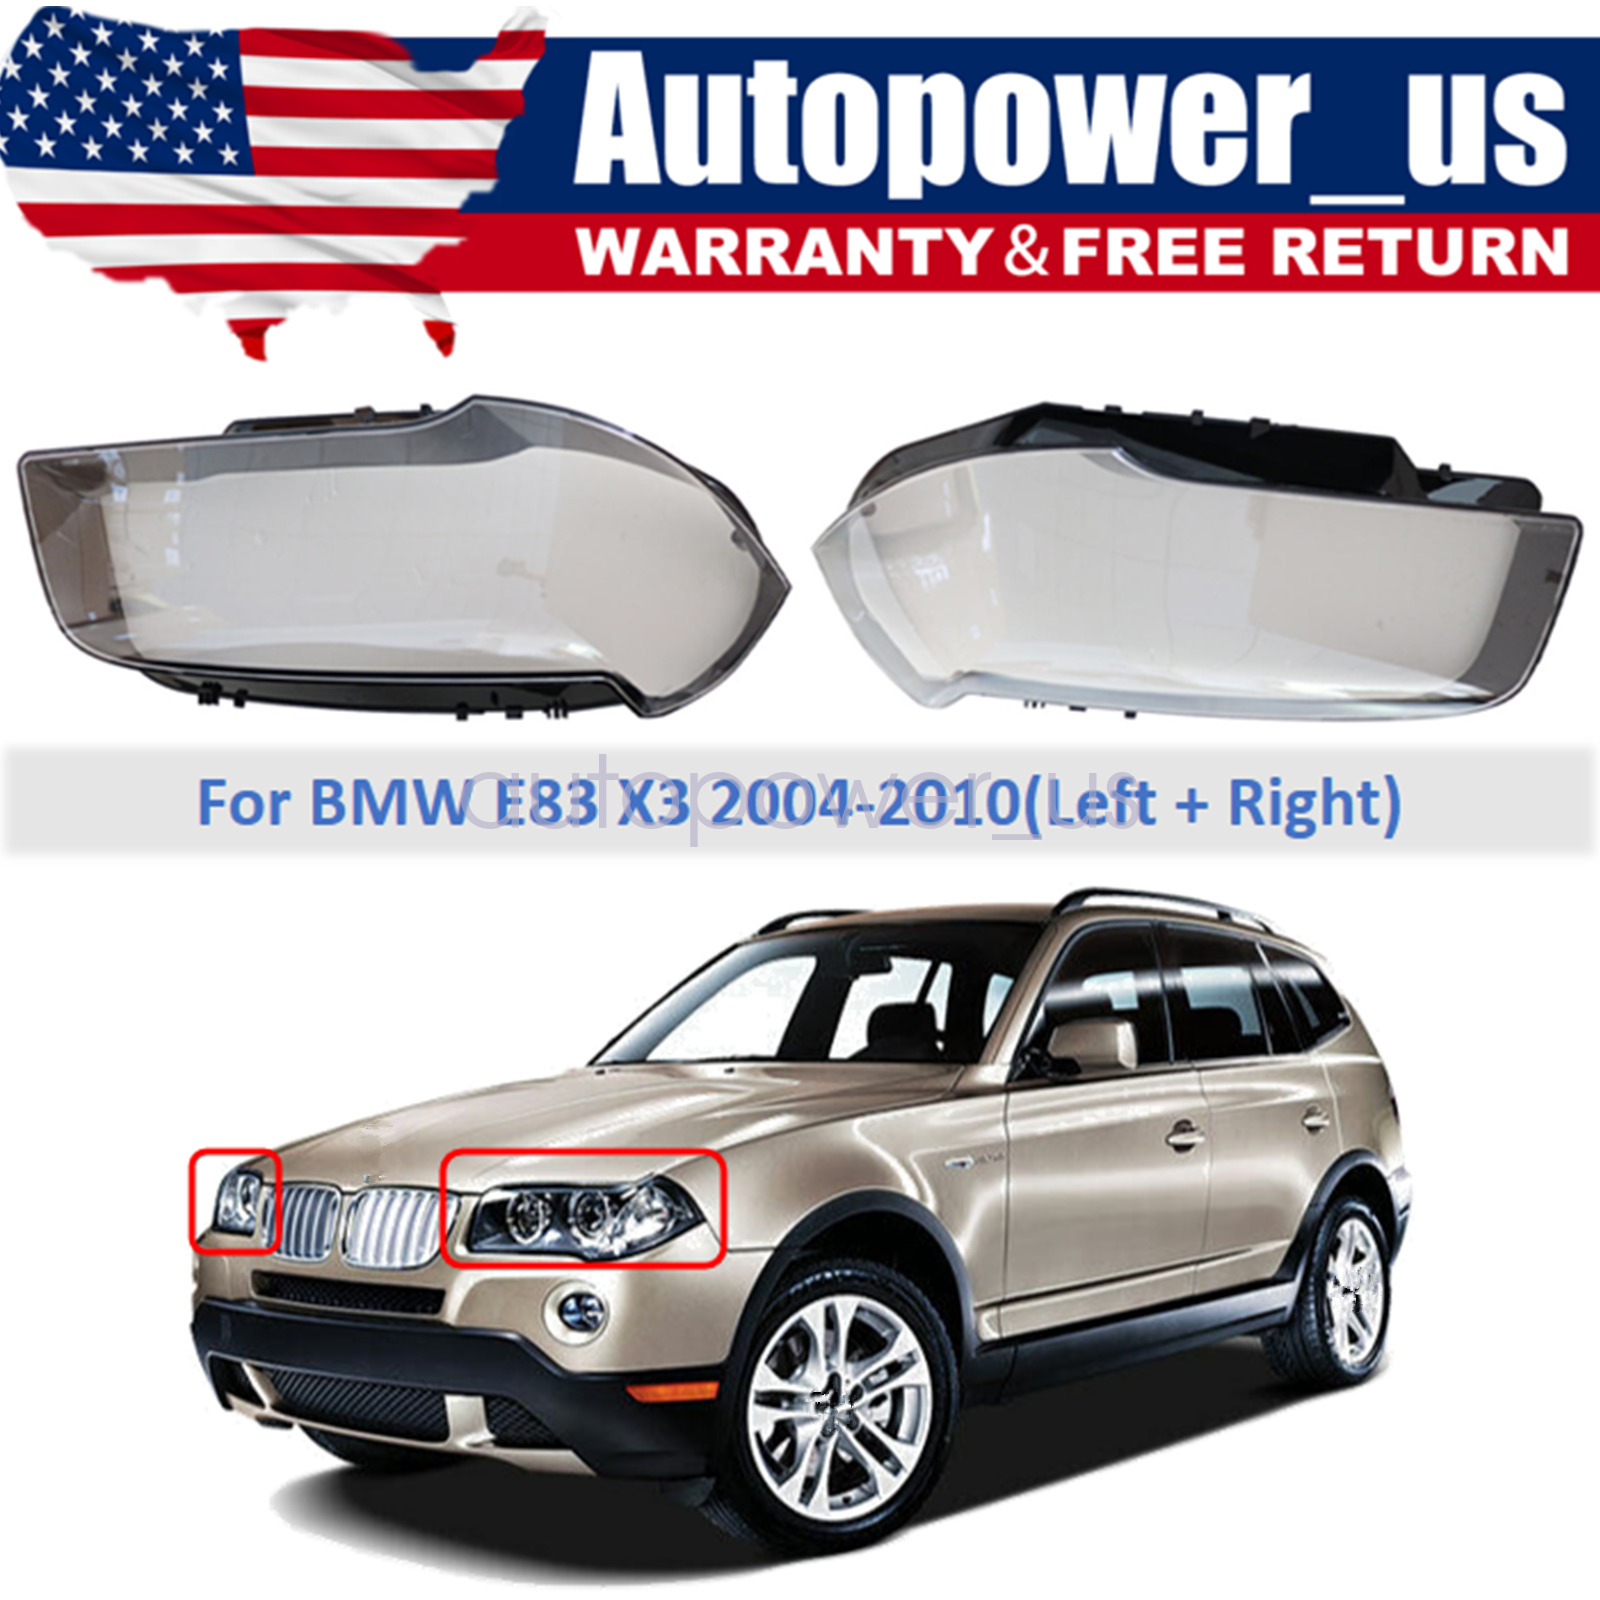 New Front Headlight Lens Headlamp Cover For BMW X3 E83 2004-2010 Left Right